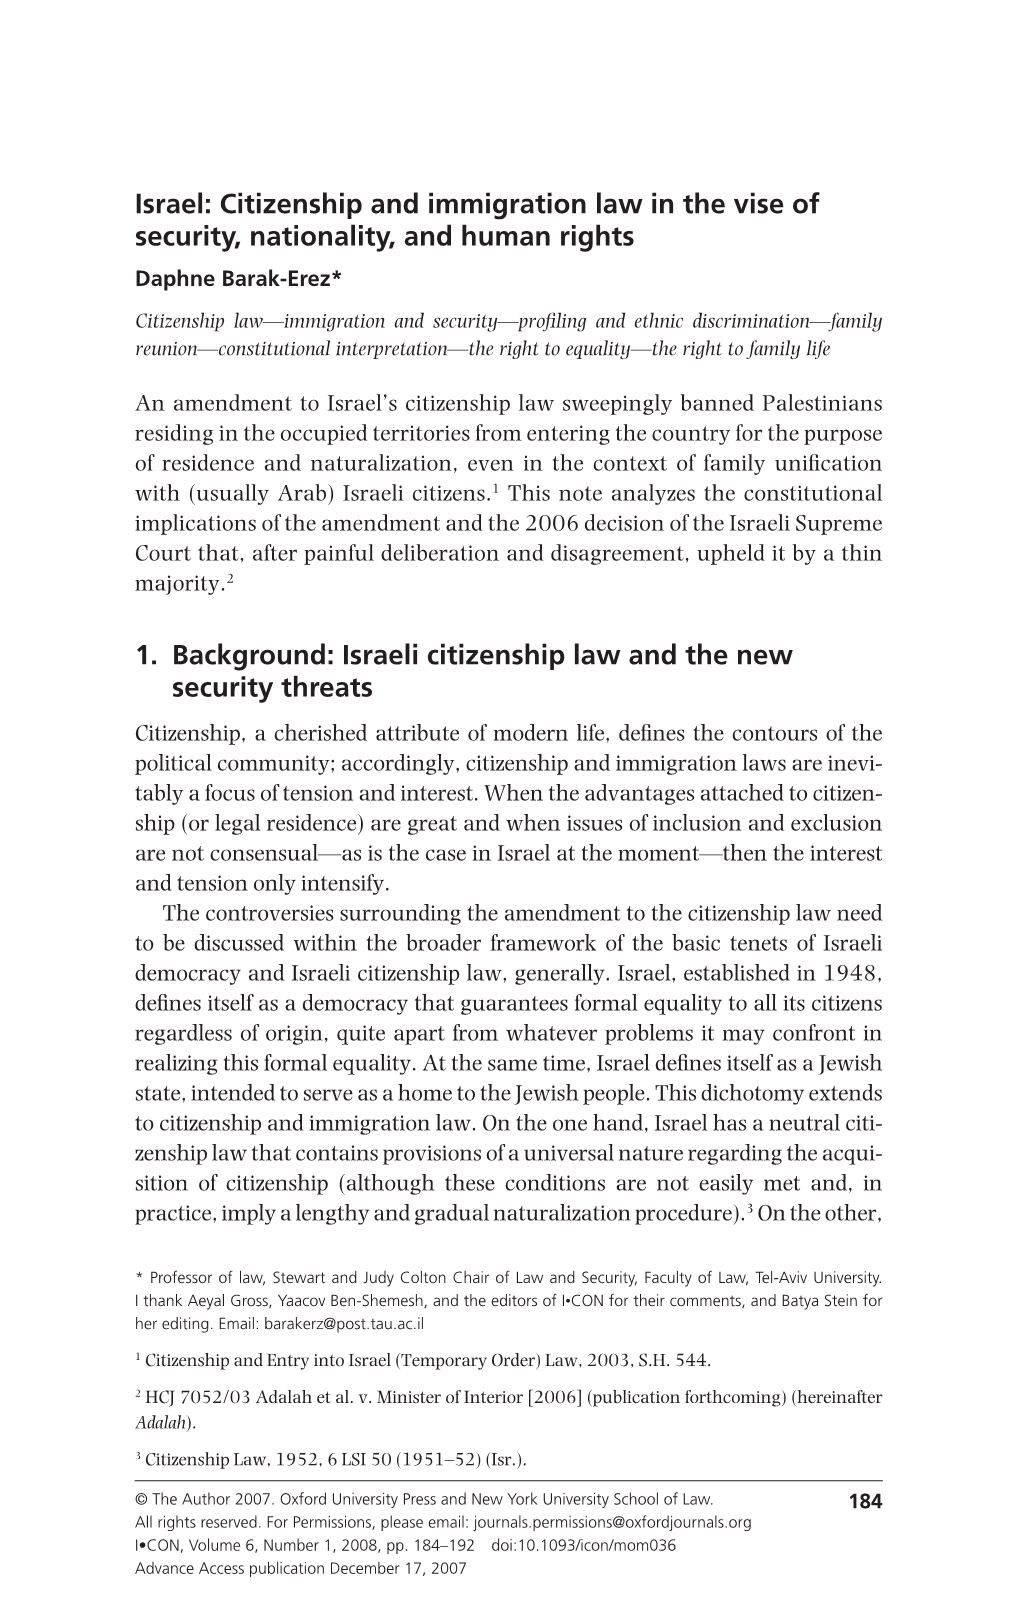 Israel: Citizenship and Immigration Law in the Vise of Security